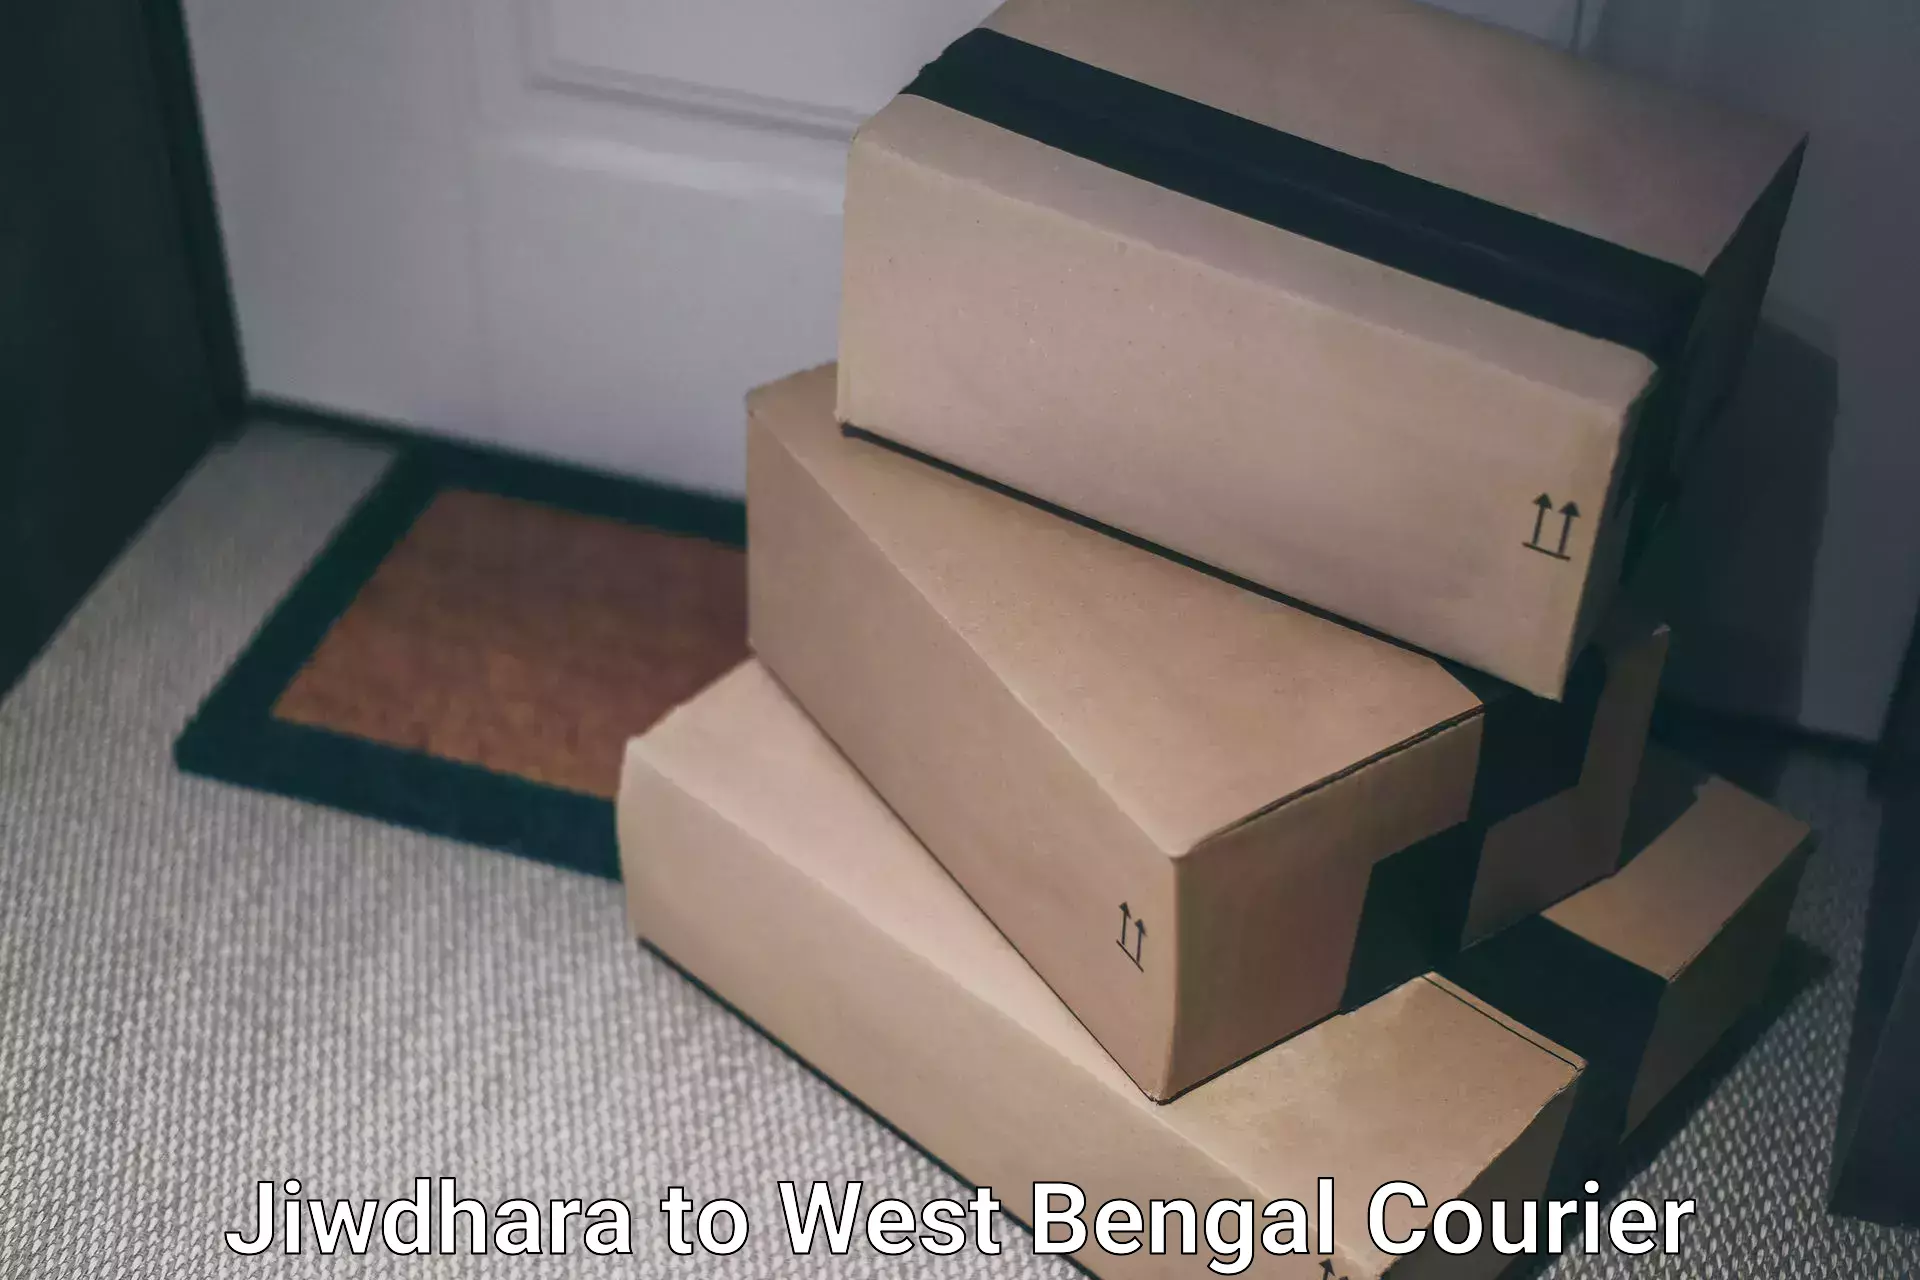 Efficient order fulfillment in Jiwdhara to West Bengal